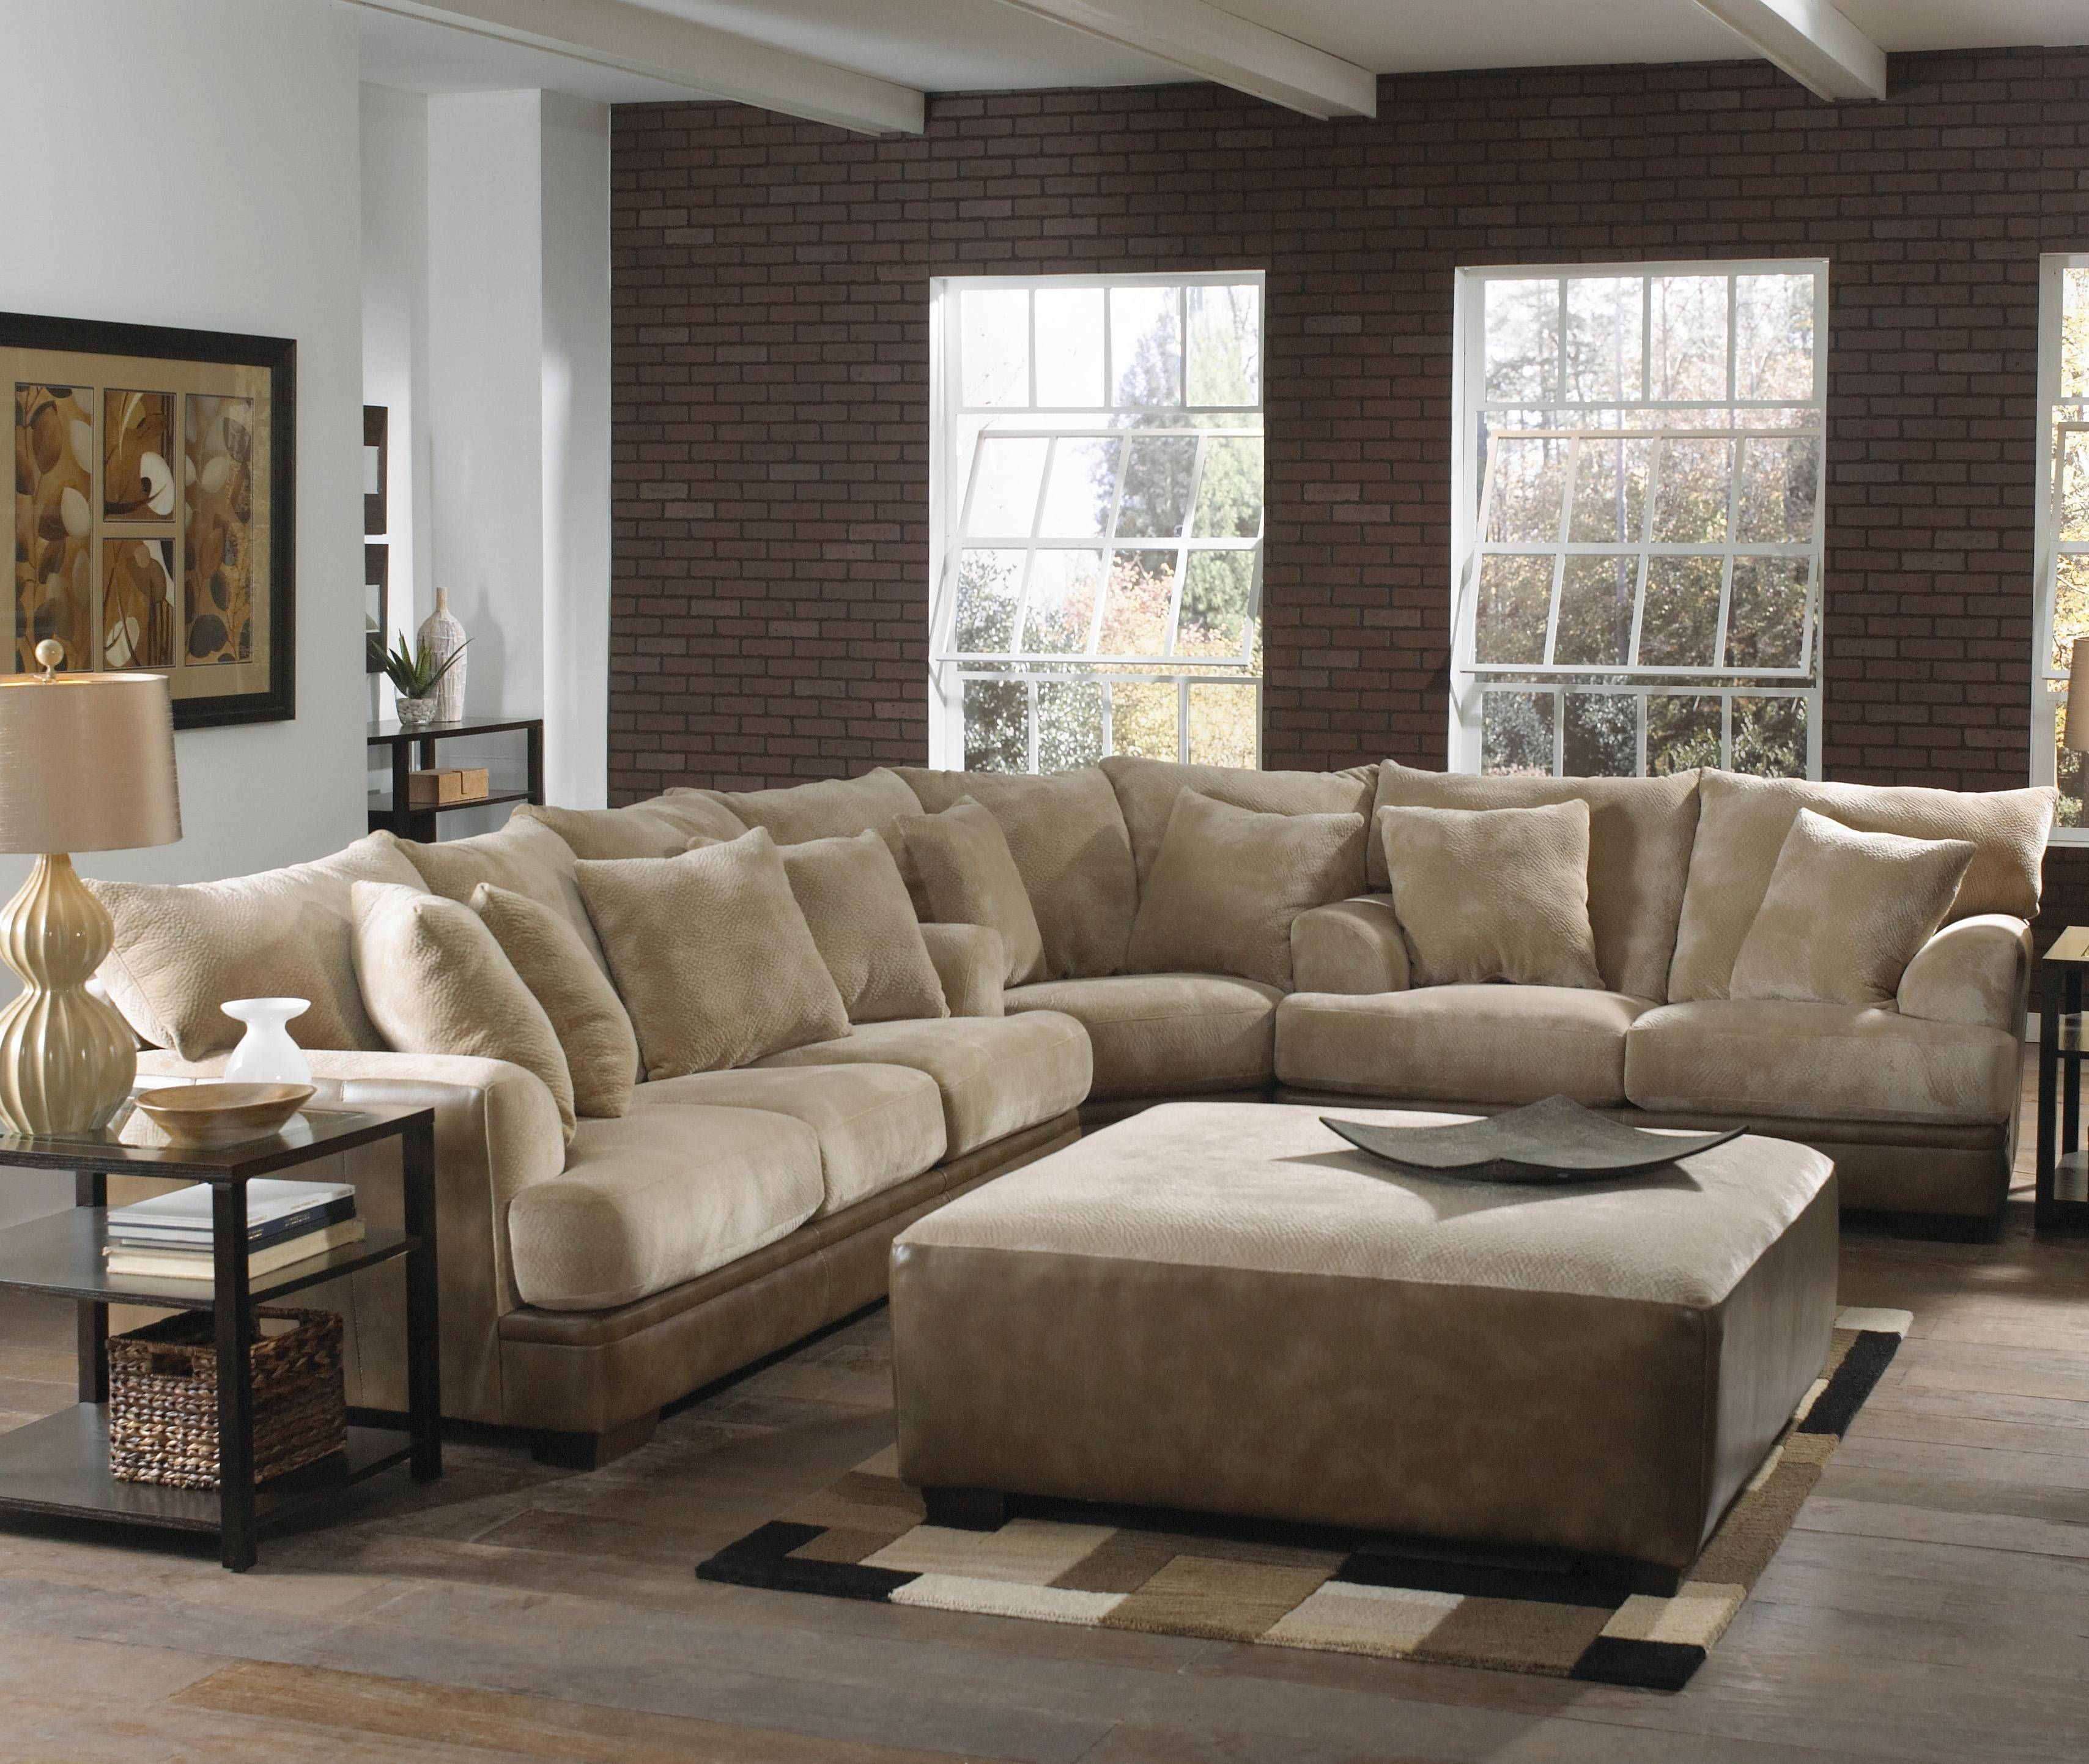 Furniture: Mesmerizing Jackson Furniture Sectional For Cozy Living Regarding Sectional Sofa Ideas (View 17 of 30)